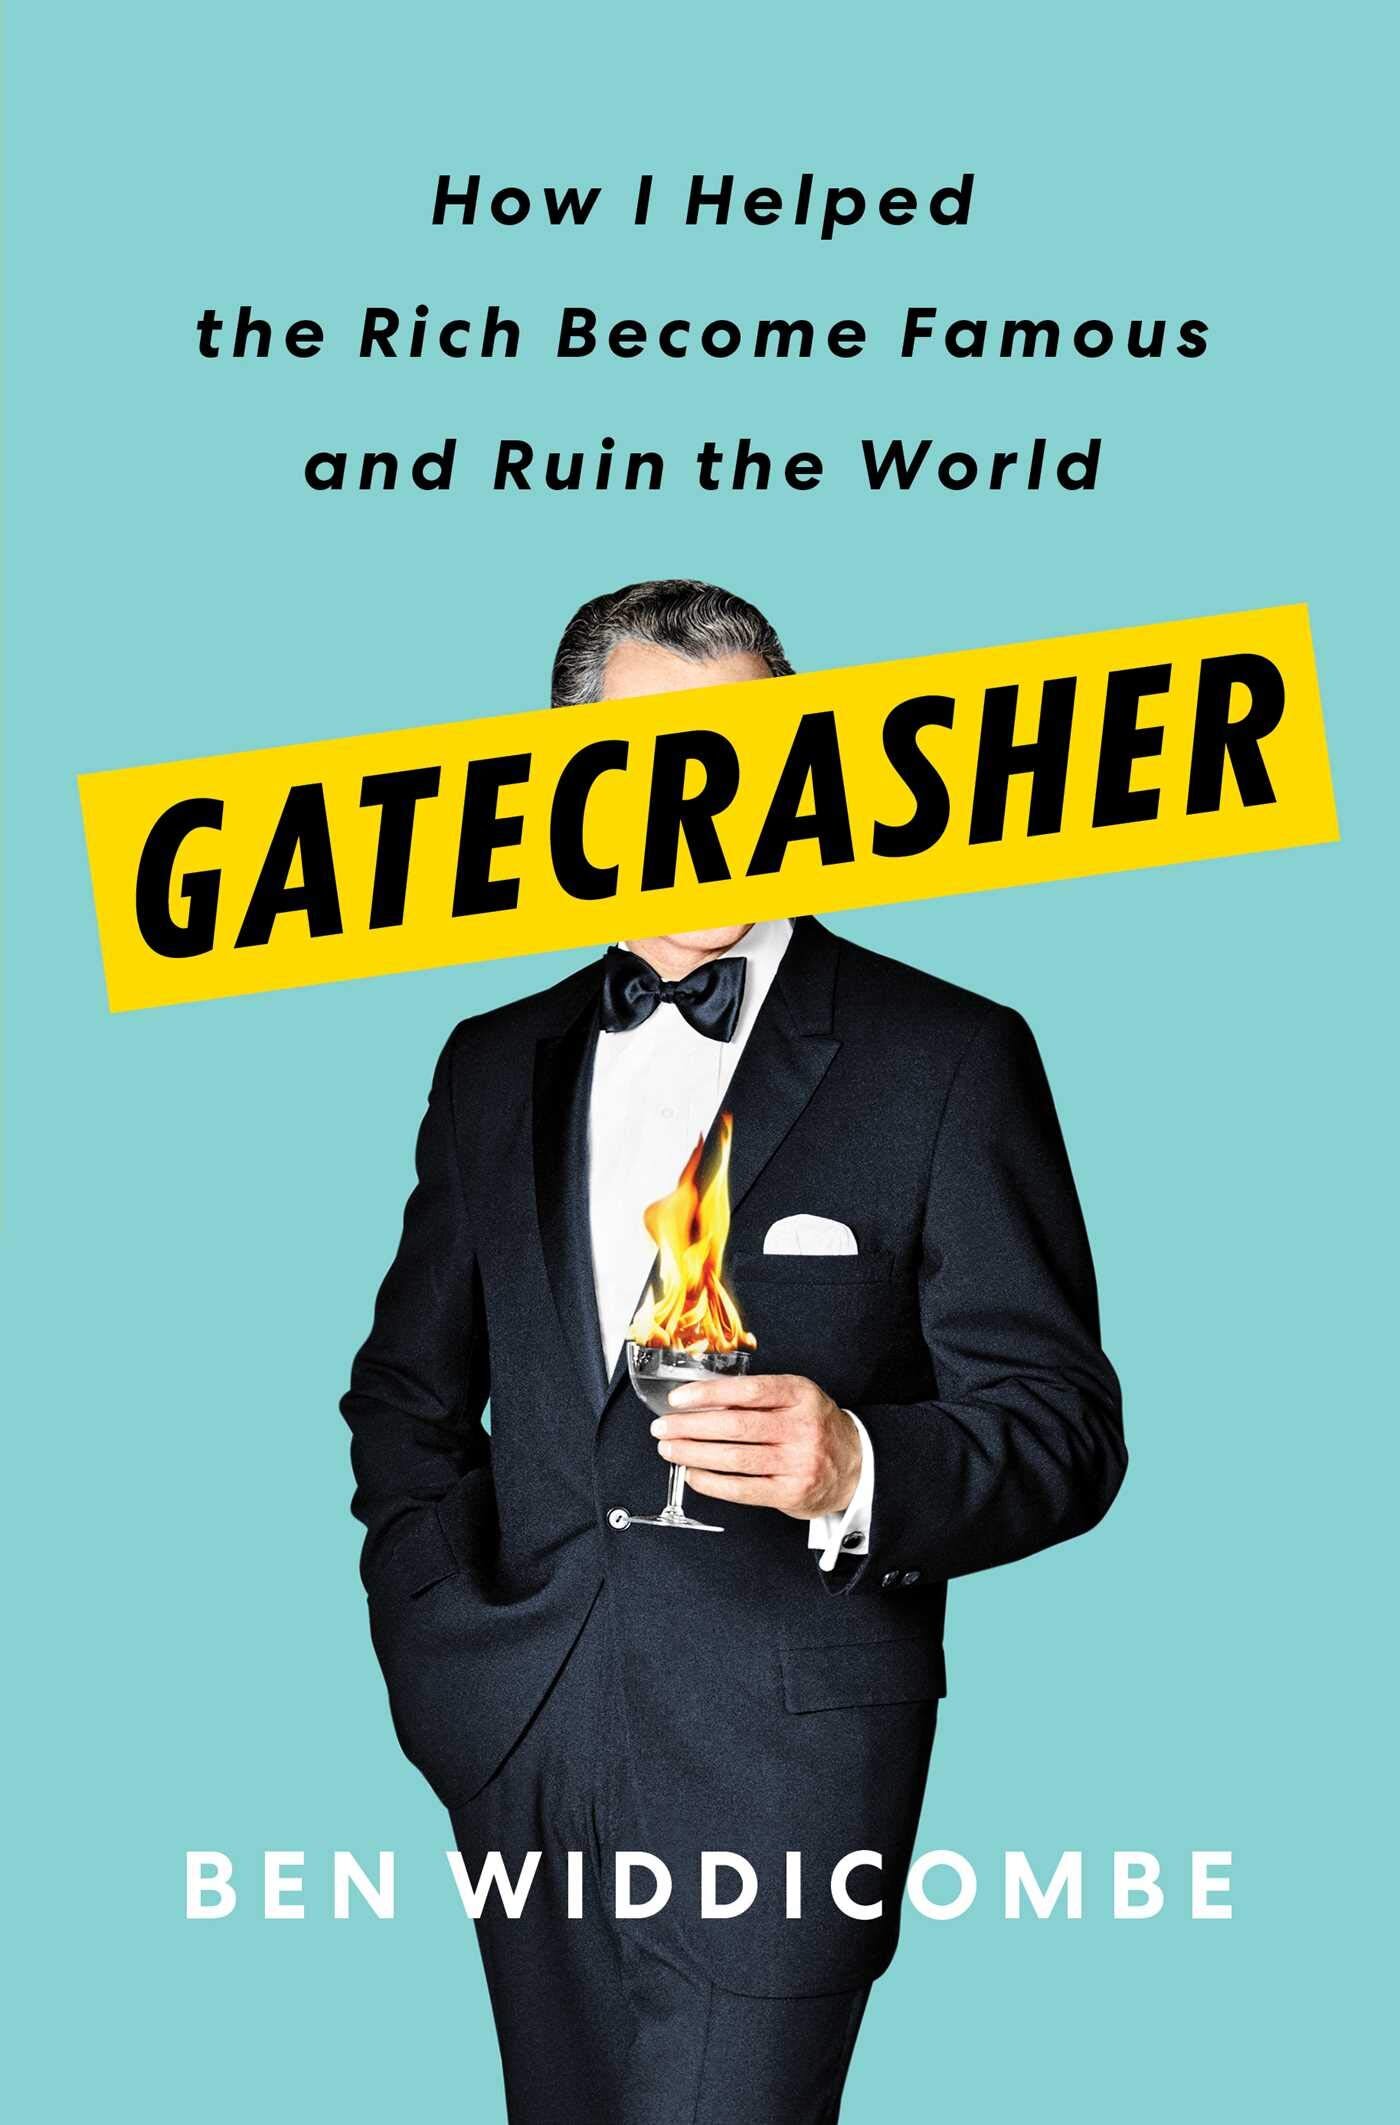 Gatecrasher- How I Helped the Rich Become Famous and Ruin the World